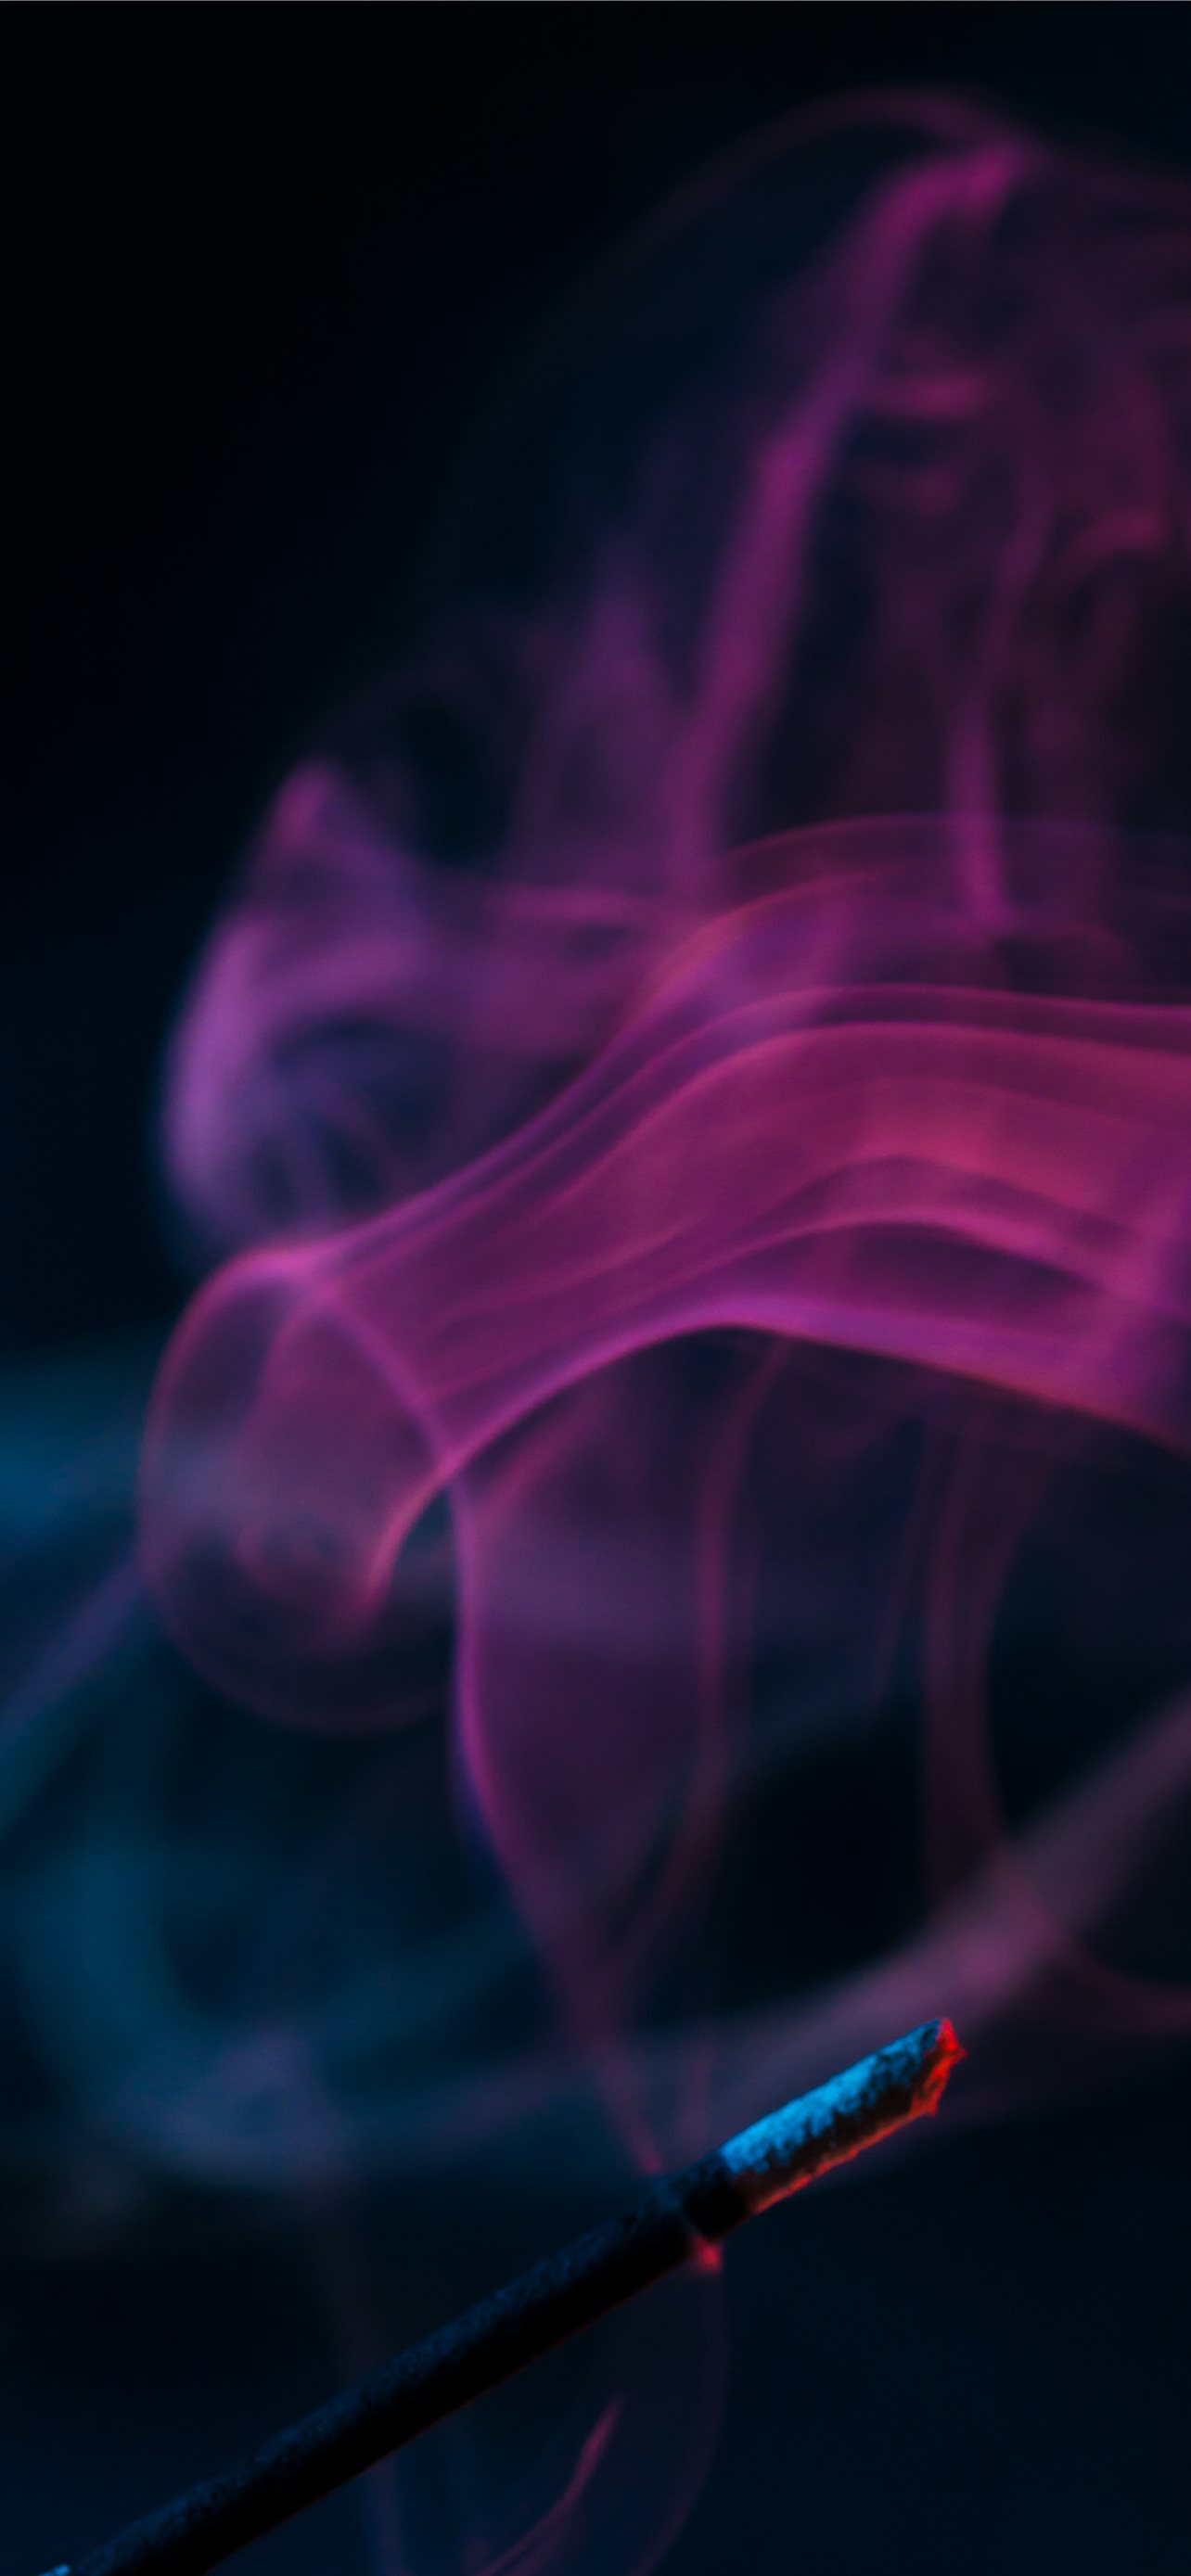 1080x1920 / 1080x1920 smoke, hd, abstract for Iphone 6, 7, 8 wallpaper -  Coolwallpapers.me!